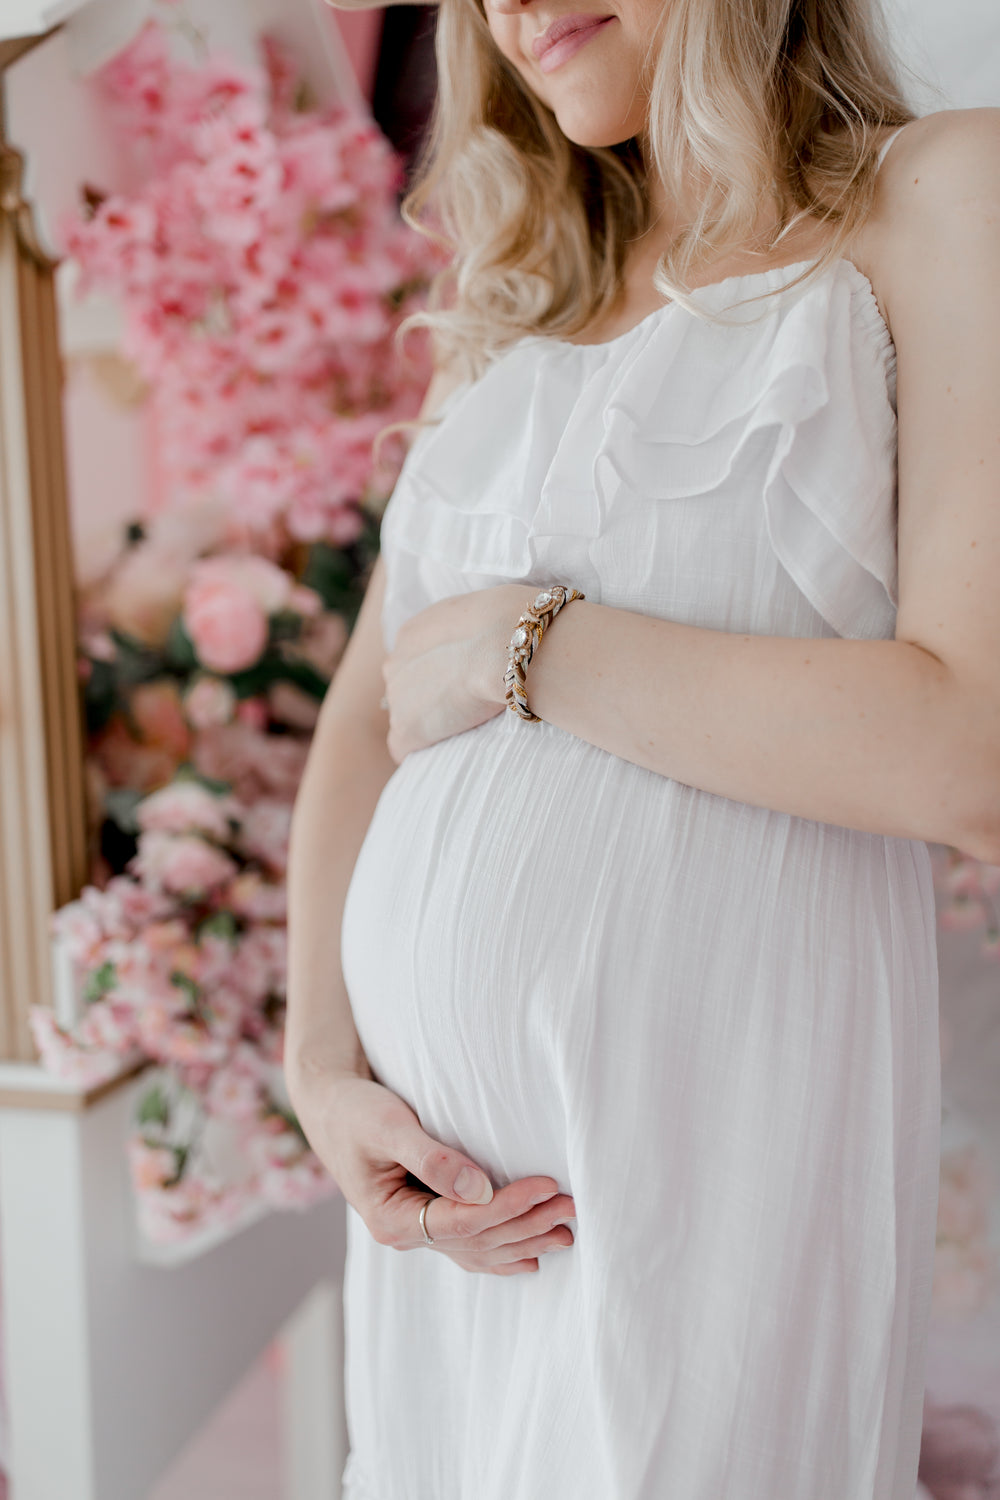 pregnant woman in a white dress holds her belly